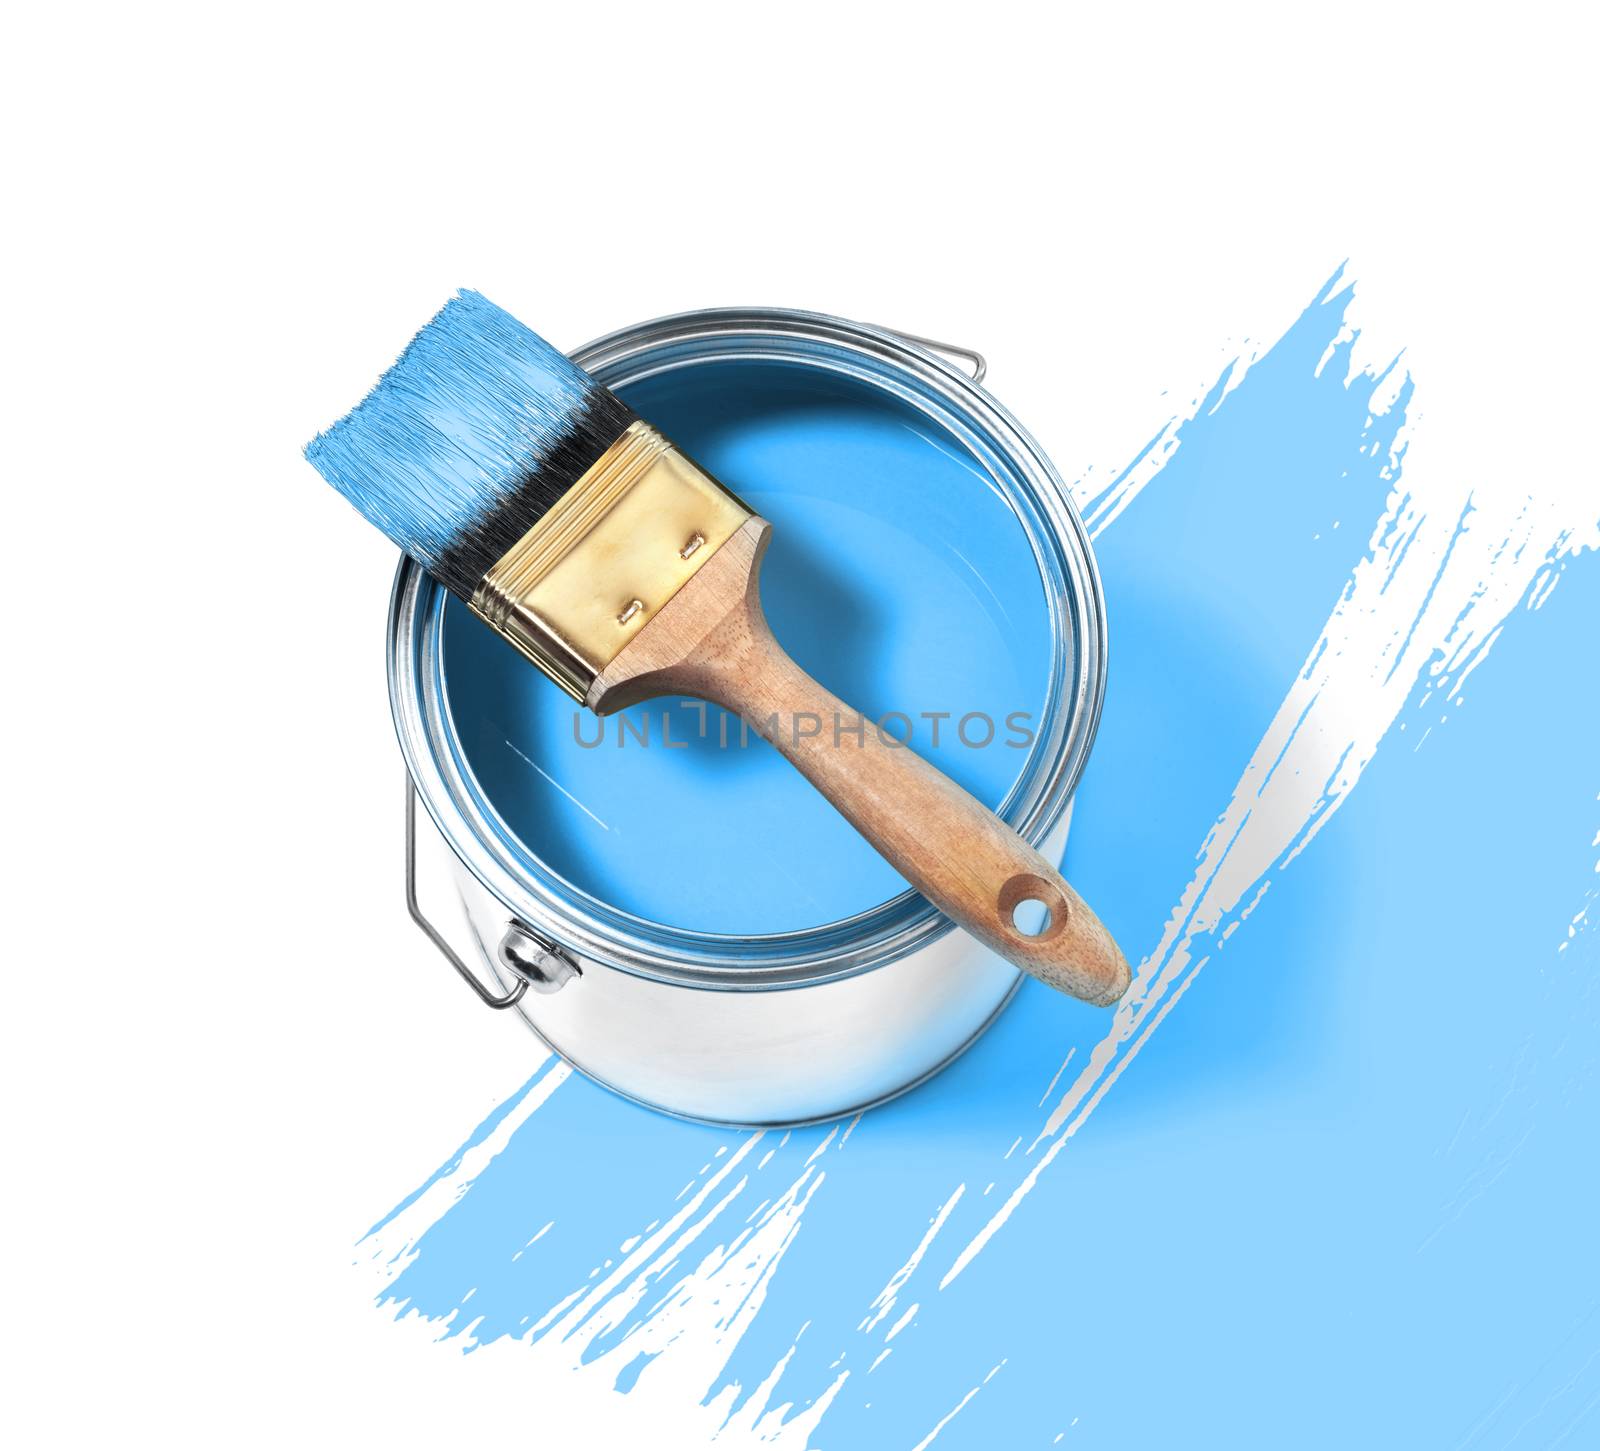 Blue paint tin can with brush on top on a white background with  by Tjeerdkruse